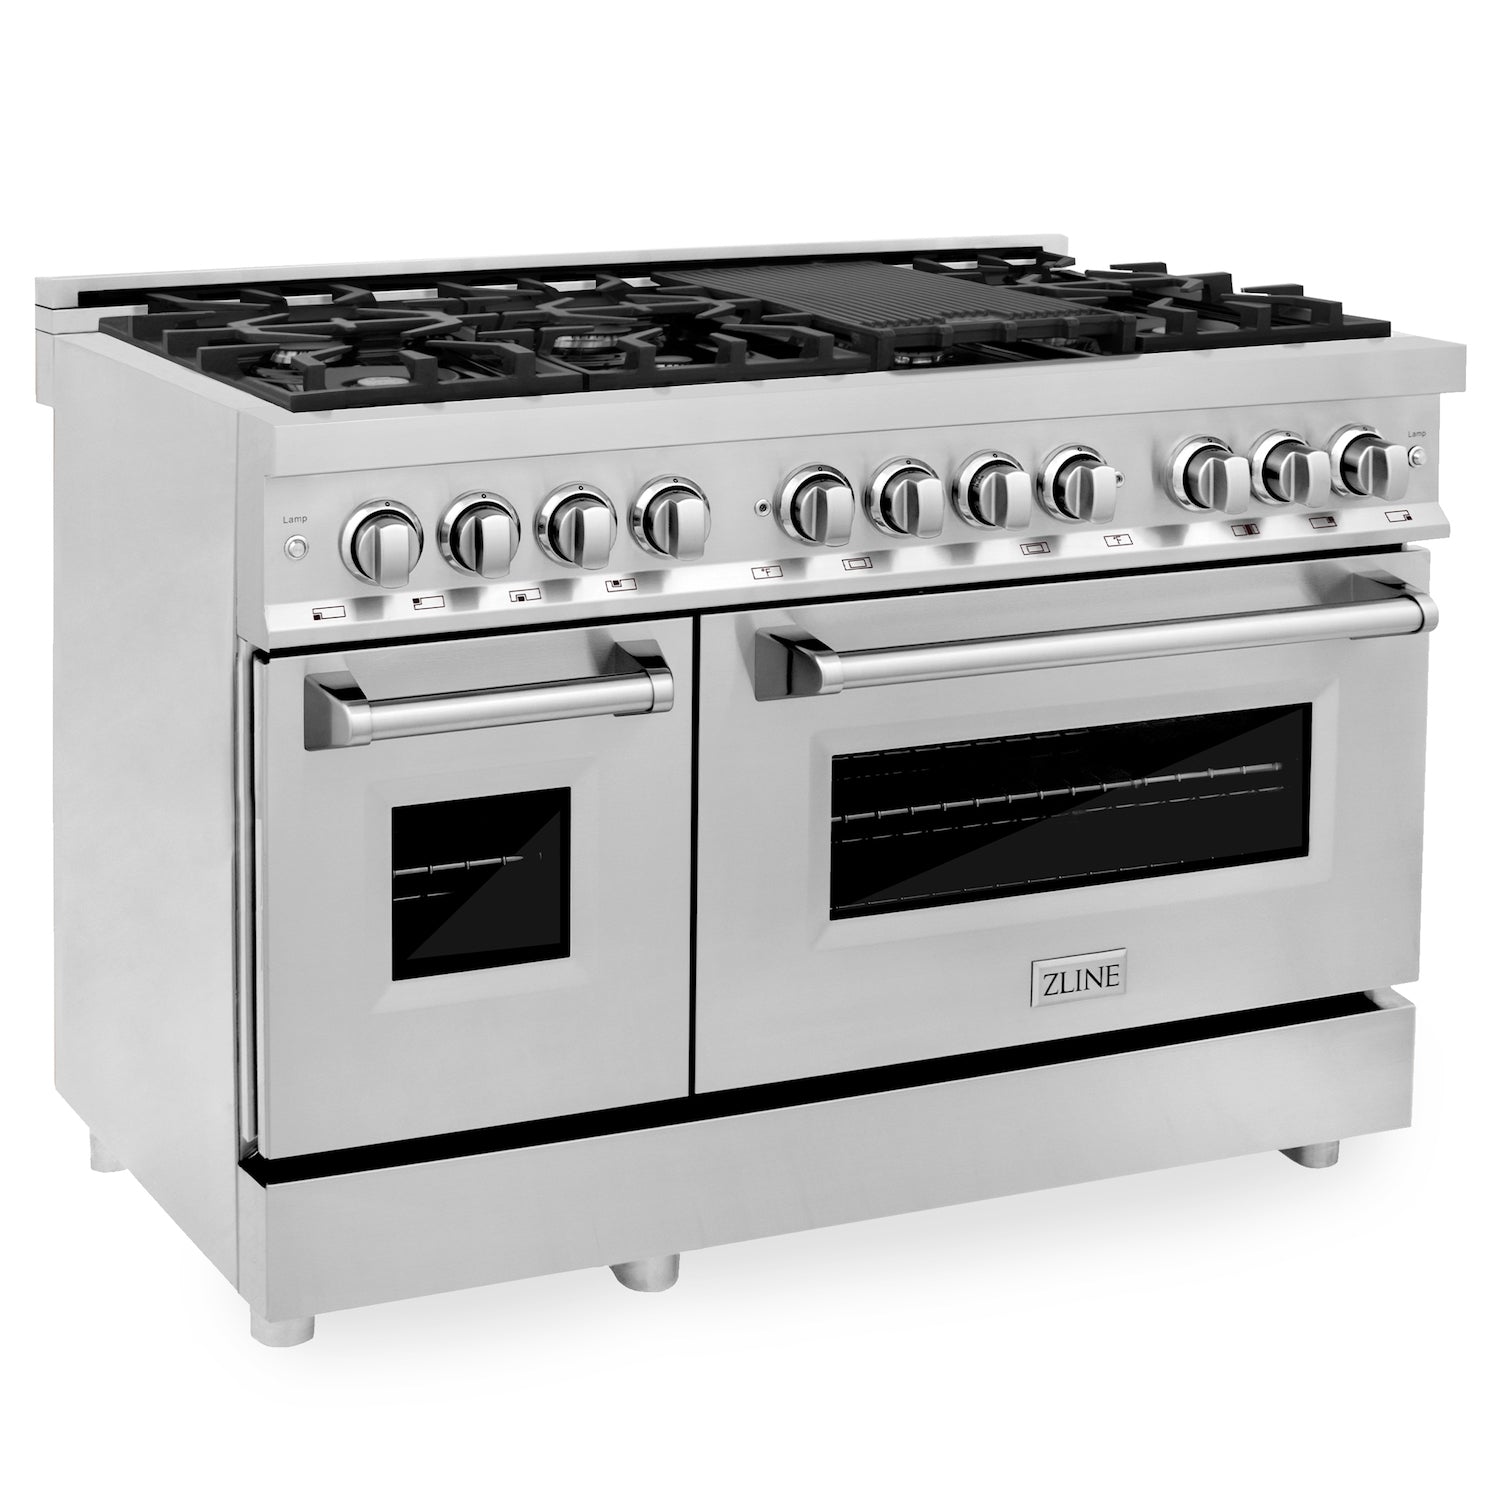 ZLINE 48 in. Professional Dual Fuel Range in Stainless Steel (RA48) side, oven closed.